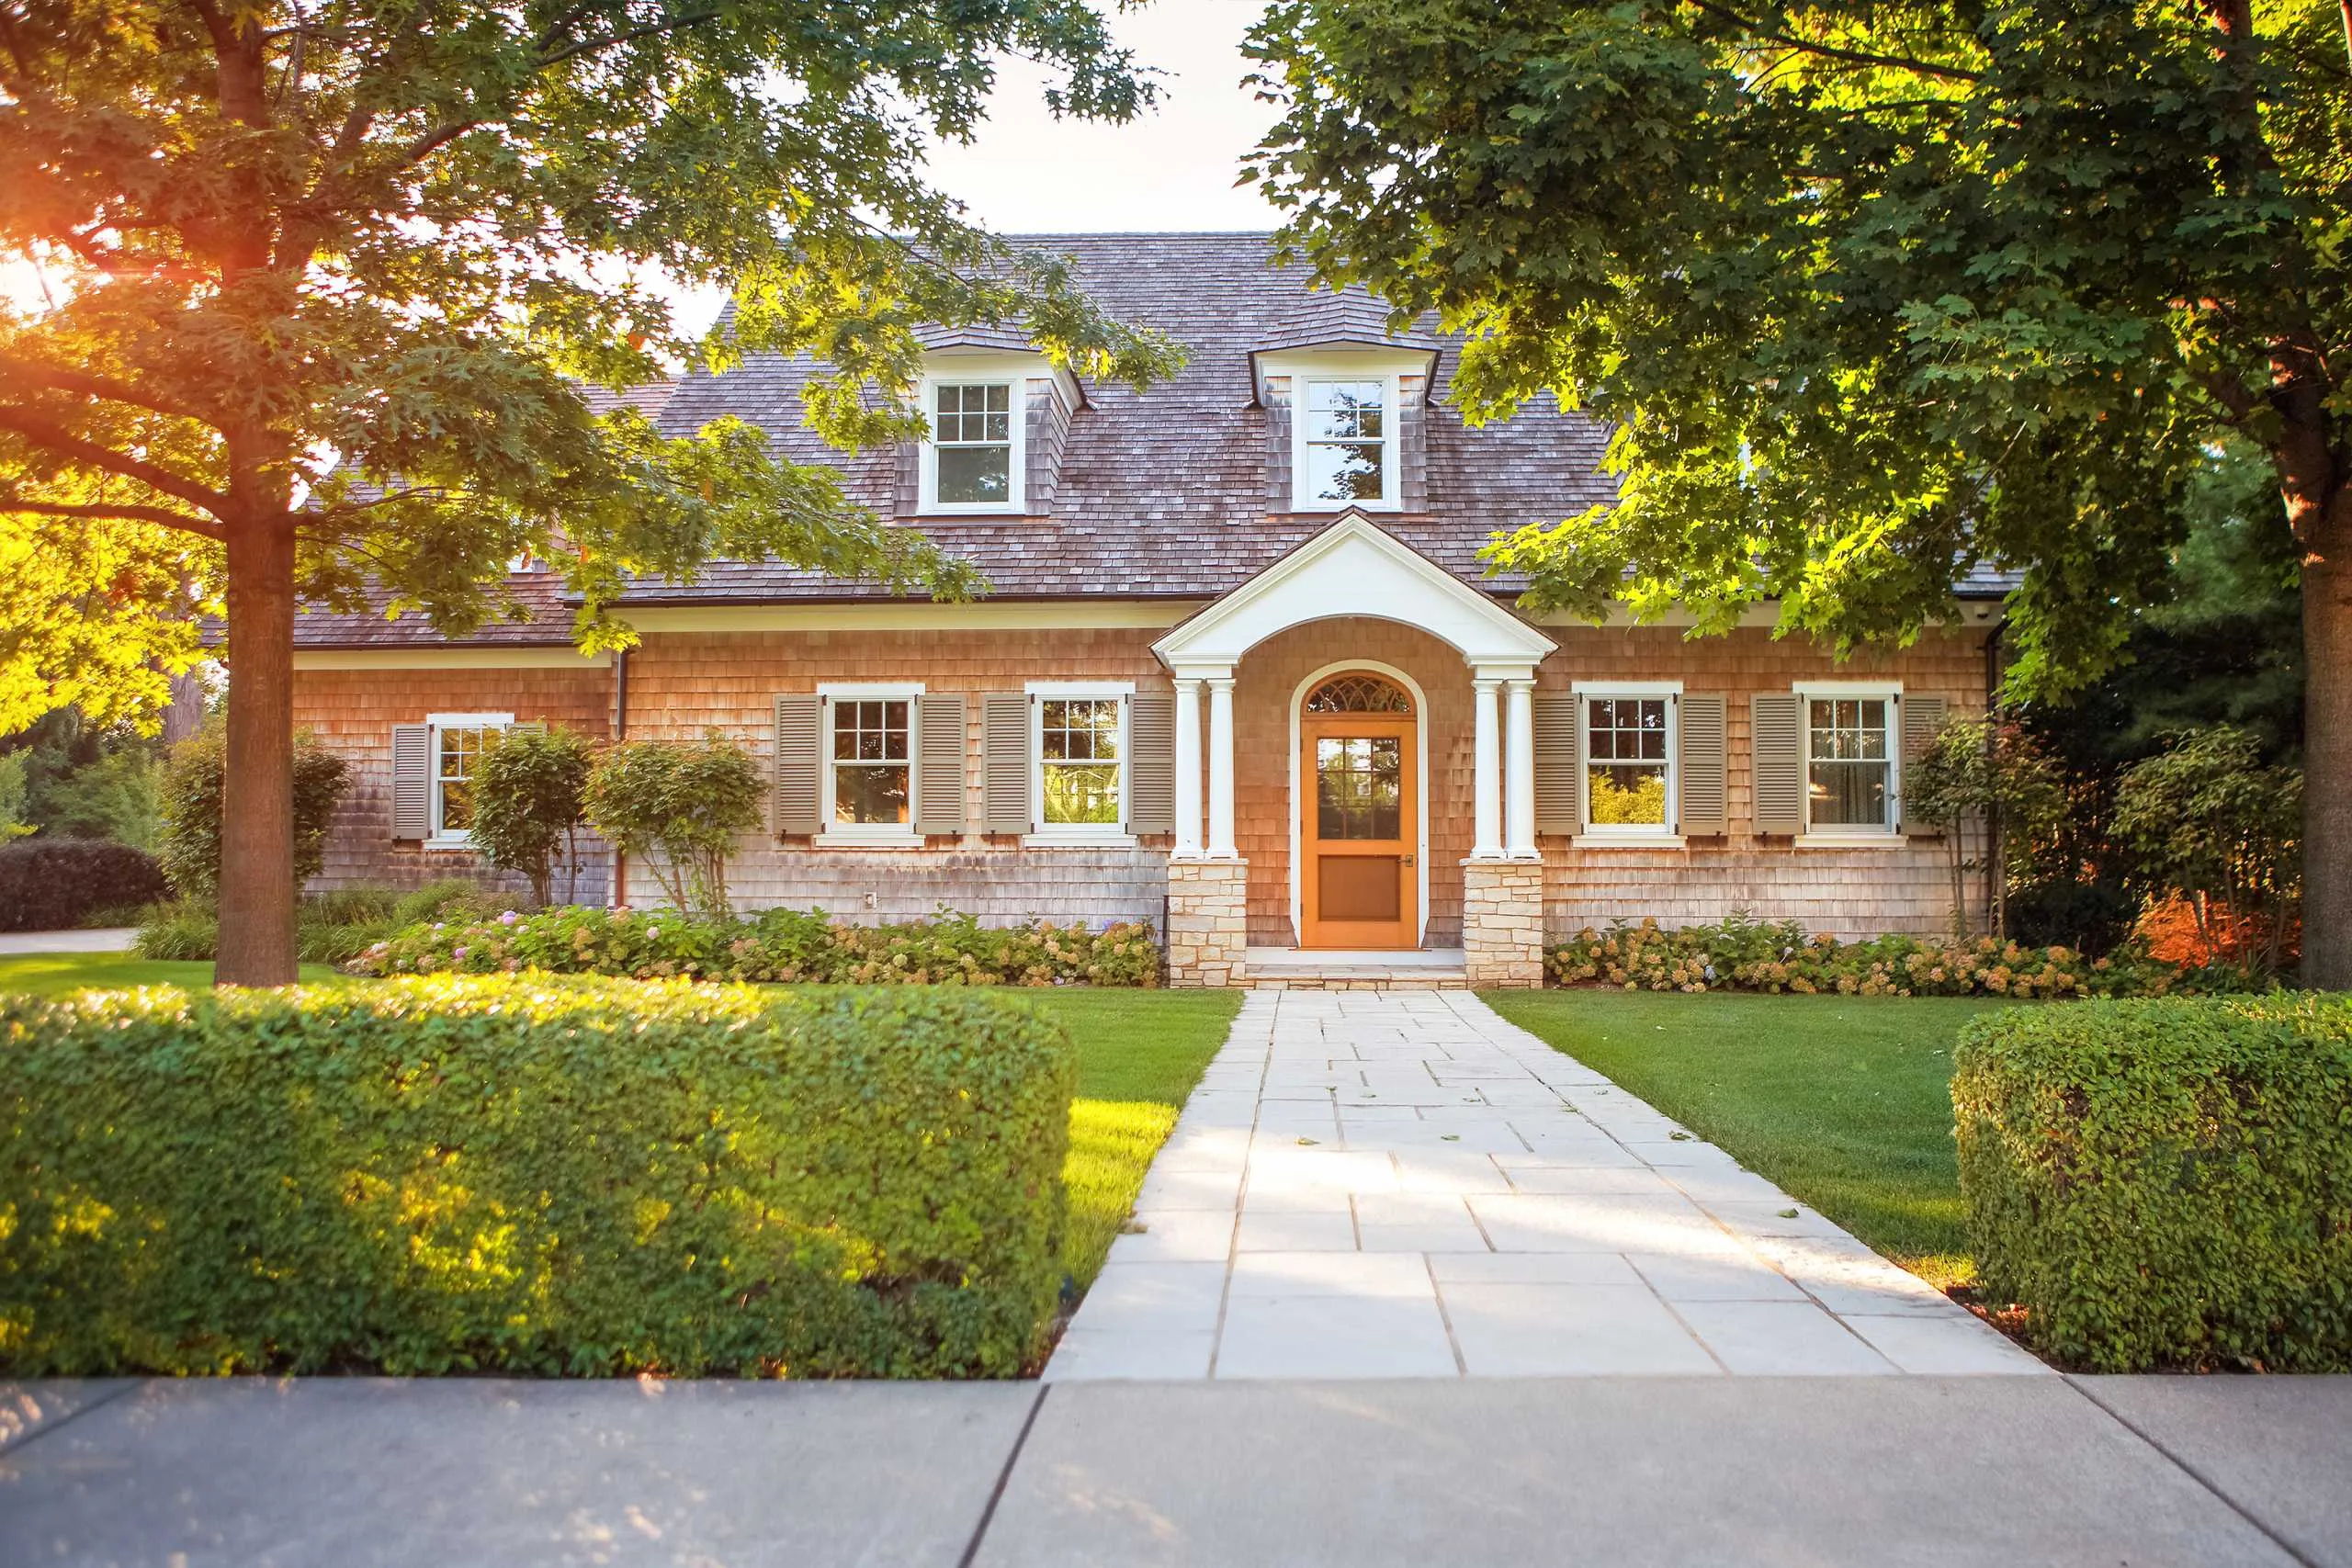 5 Exterior Upgrades That Will Increase the Value of Your Home